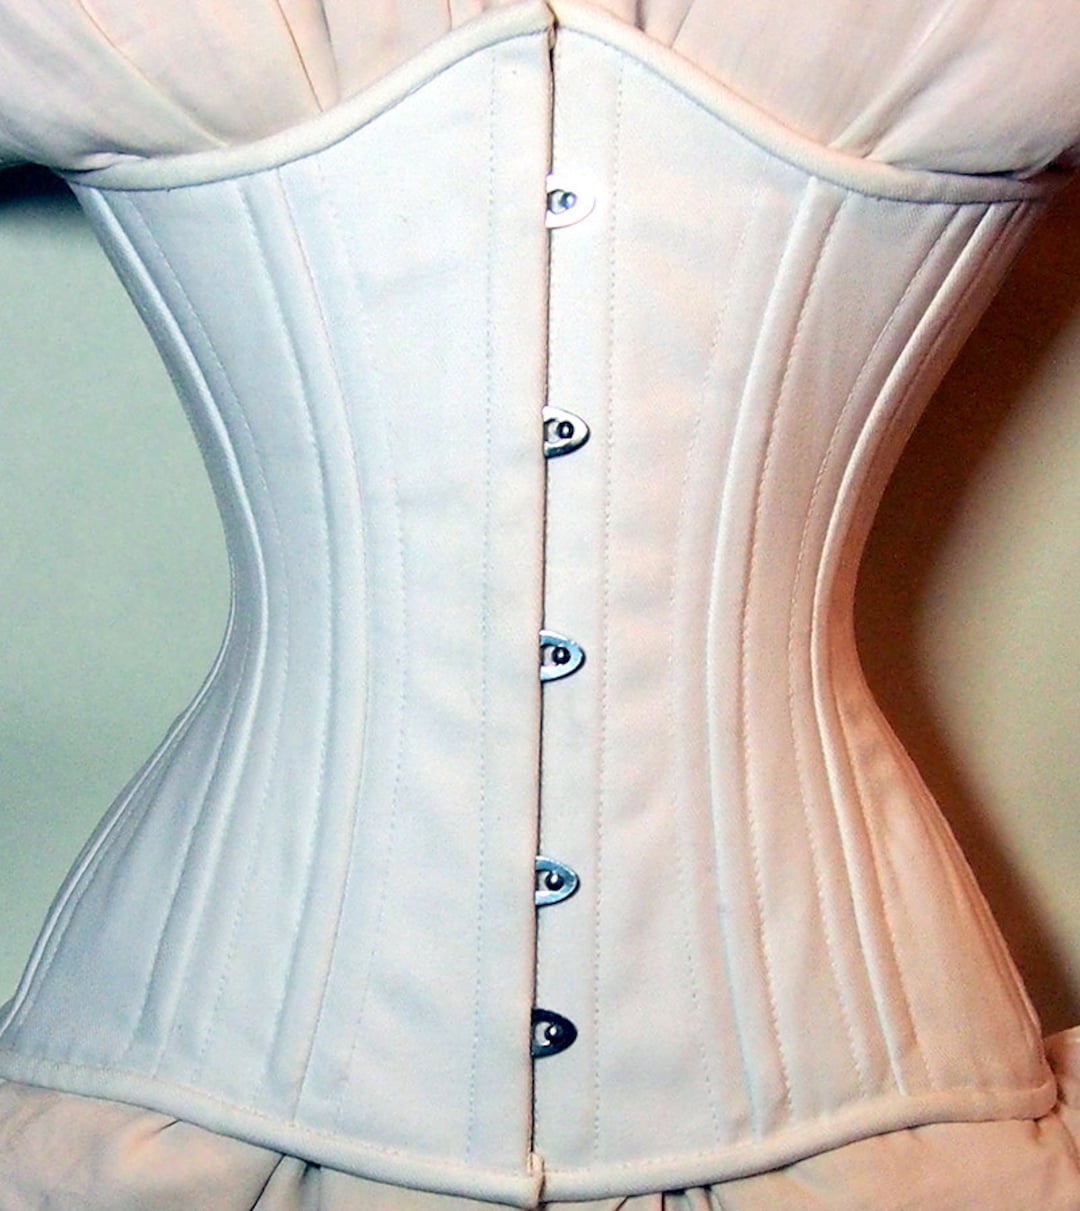 Authentic Extreme Waist Training Corsets Onhand